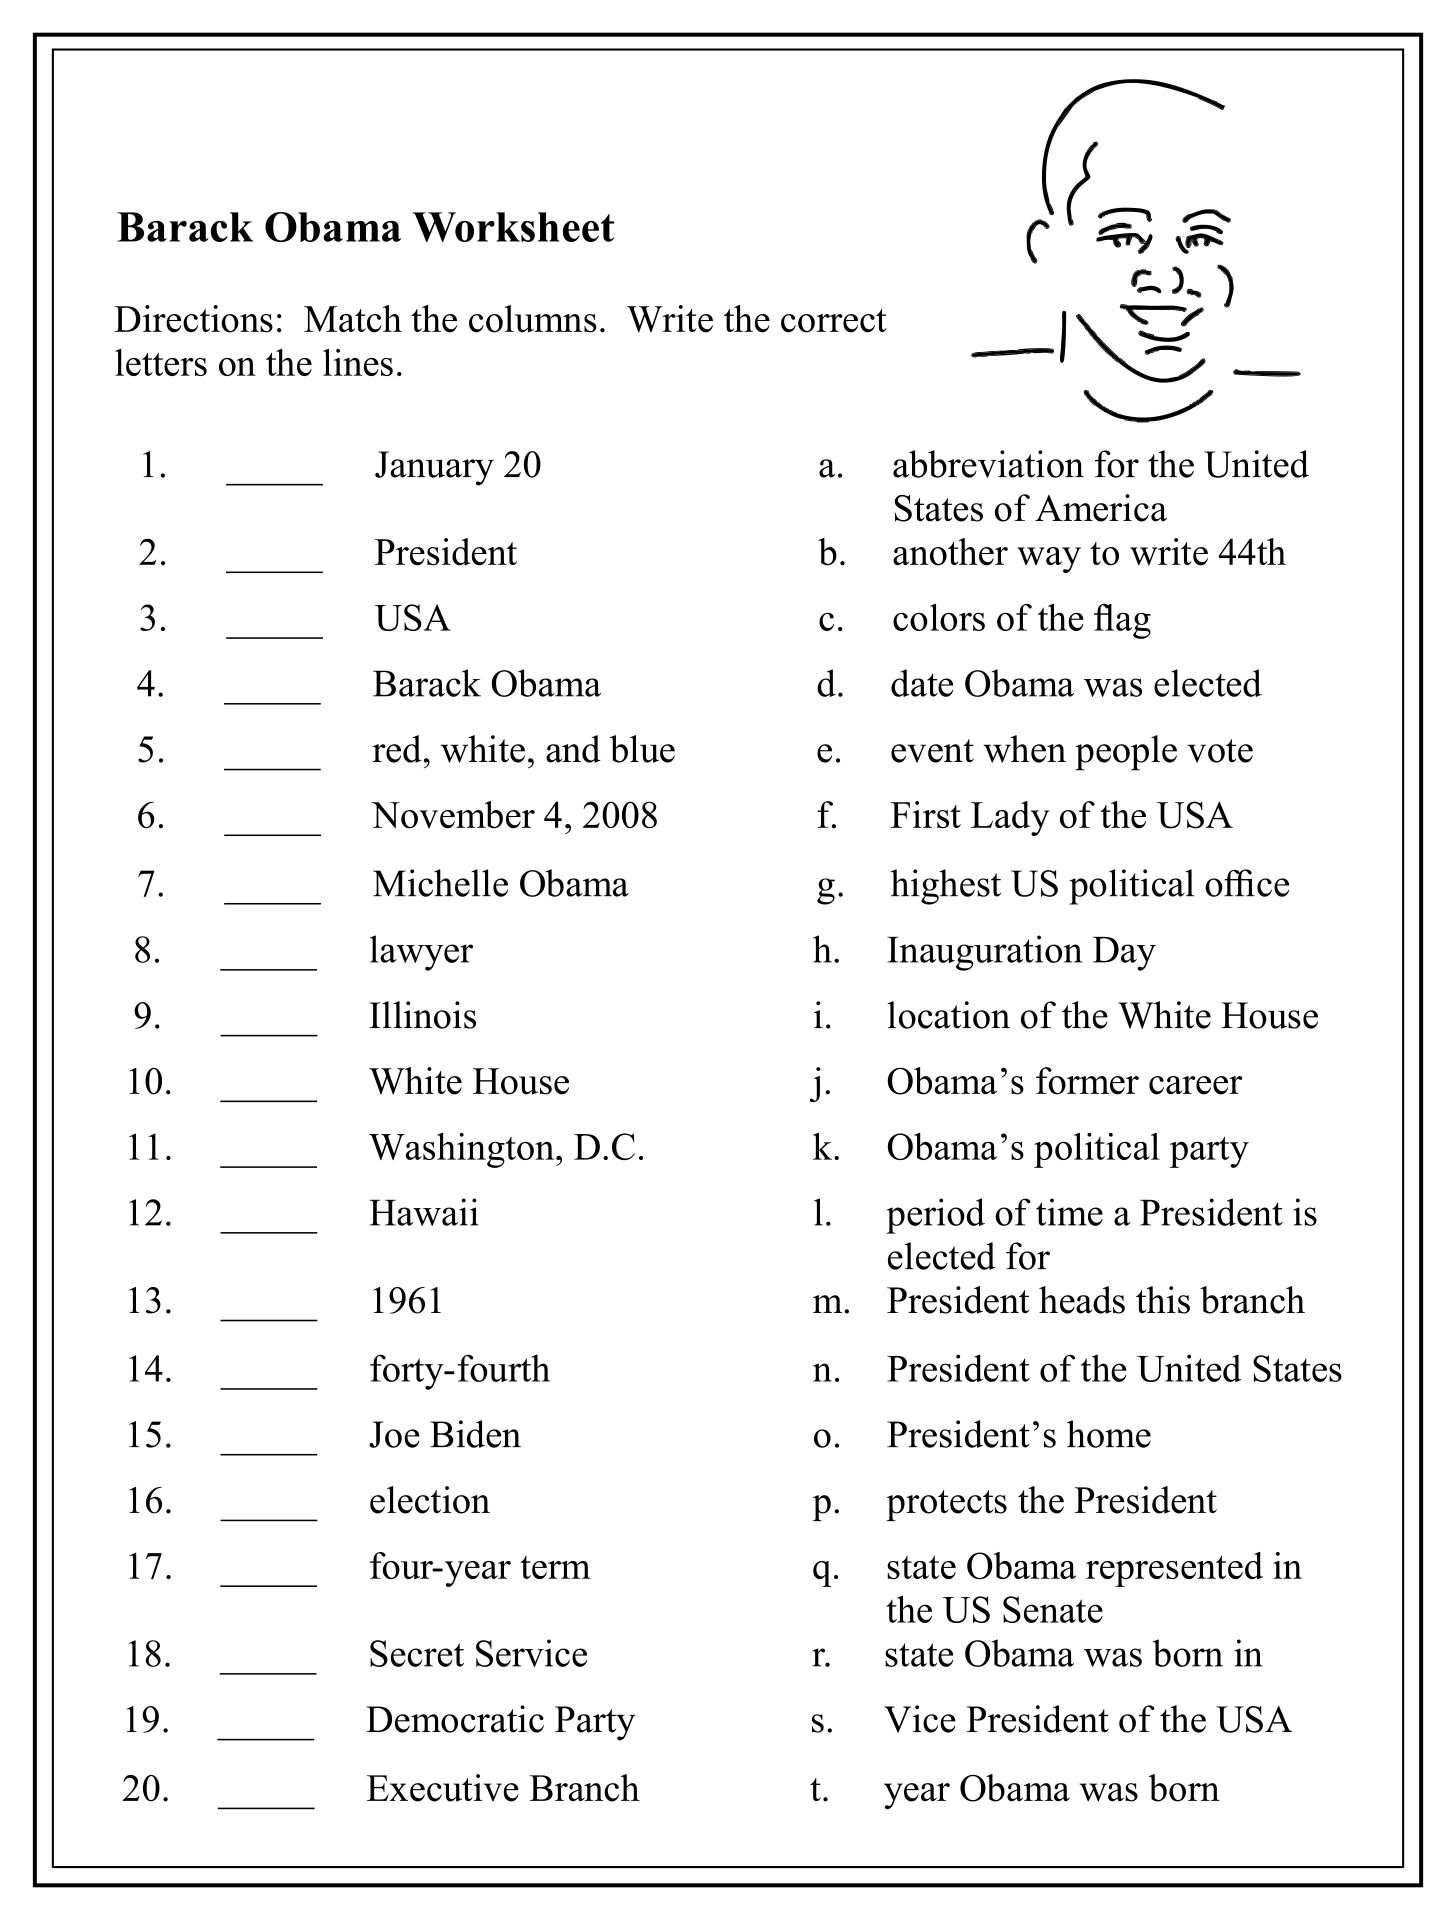 free-cognitive-worksheets-for-adults-page-2-of-7-worksheet-cbt-series